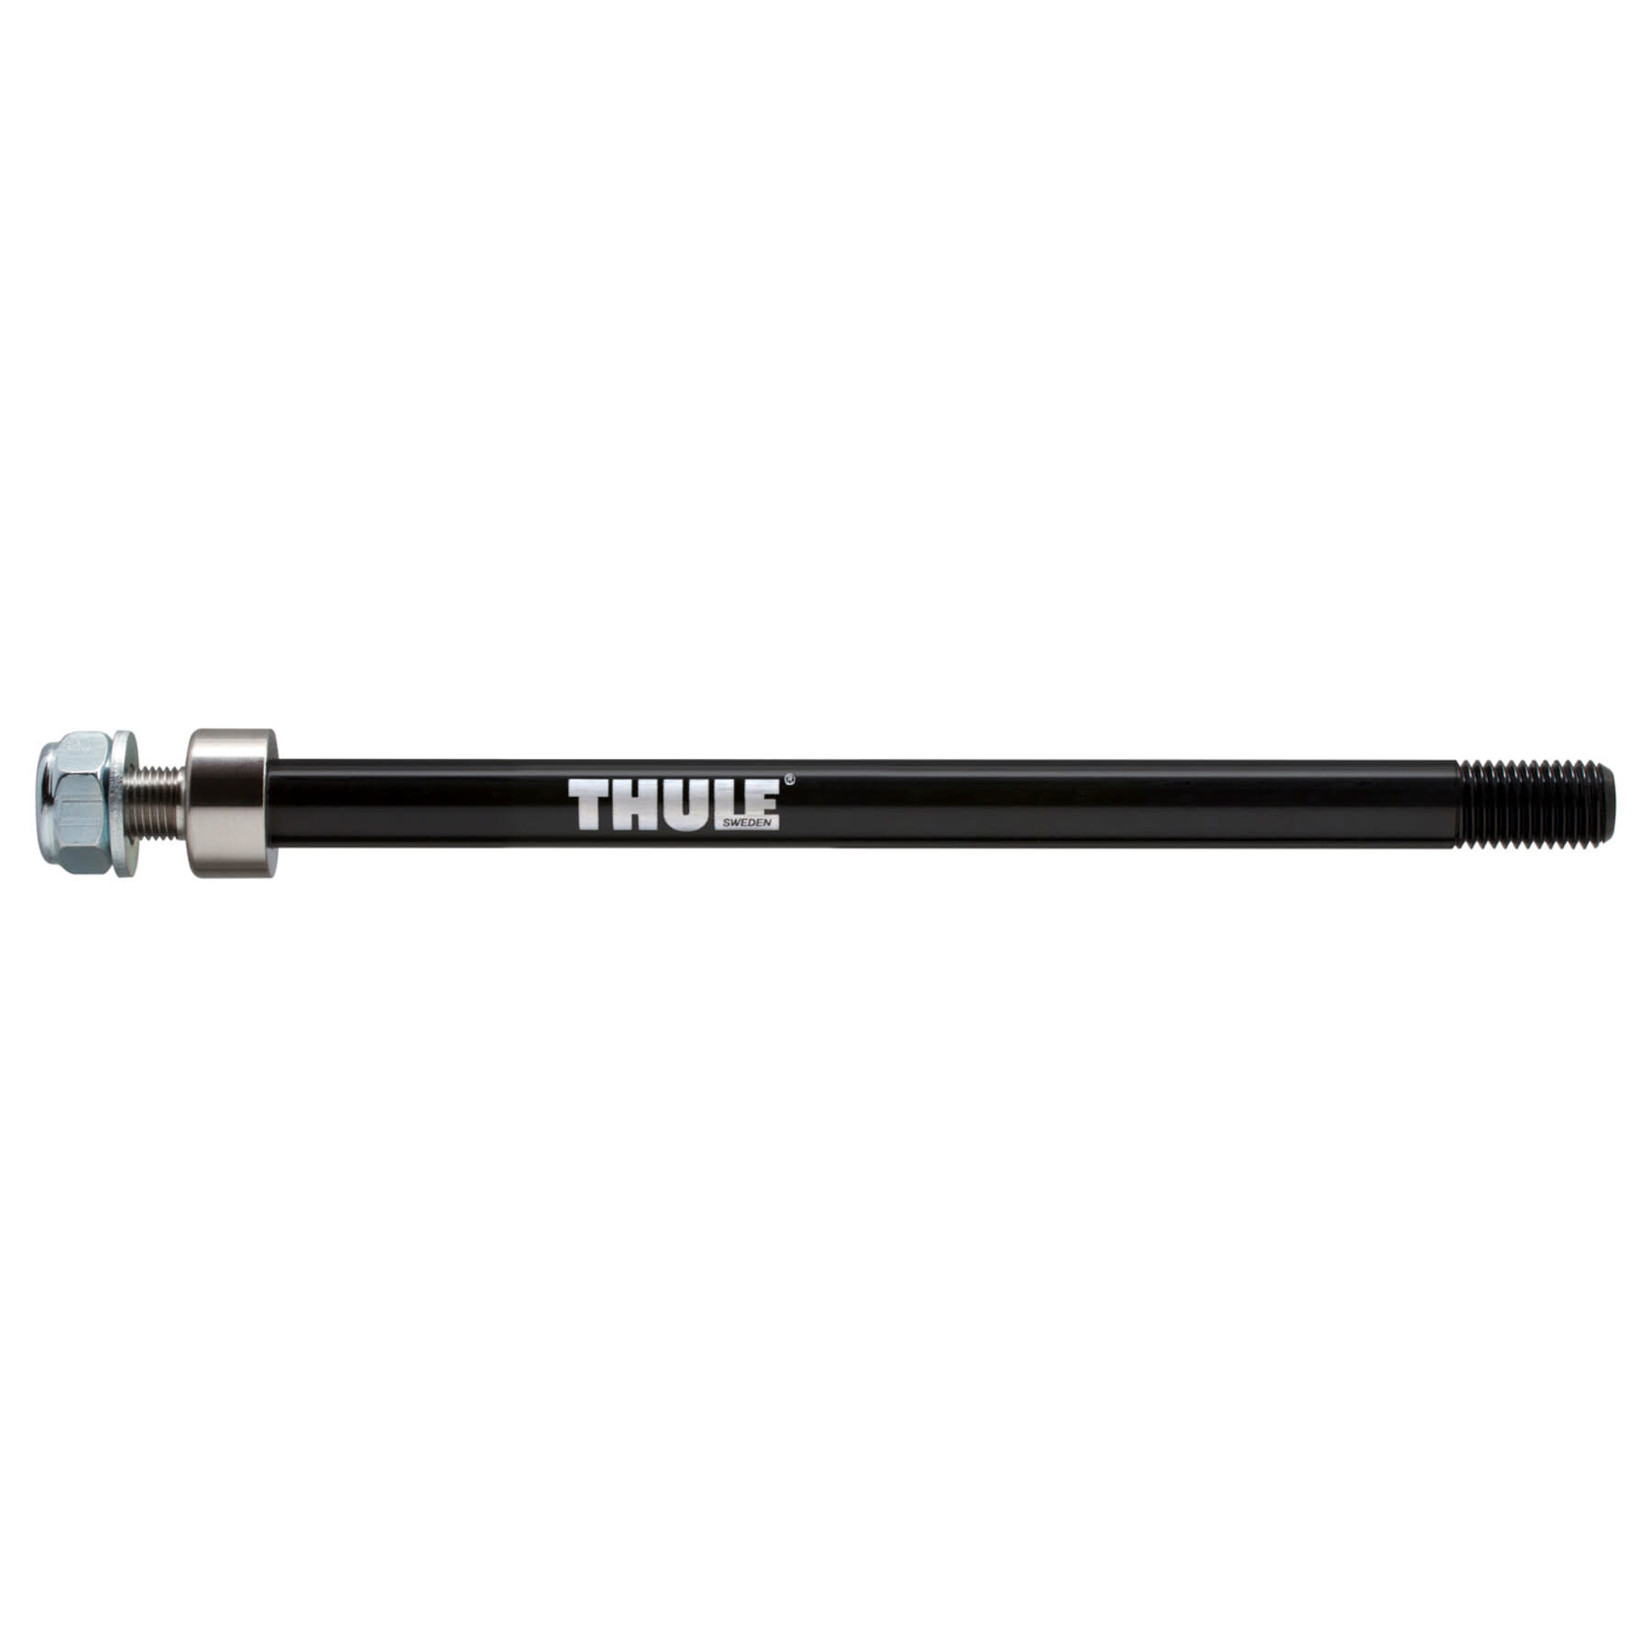 Thule Thule Thru Axle Syntace 160mm (M12 x 1.0) Adapter 160mm  20100765 - Black